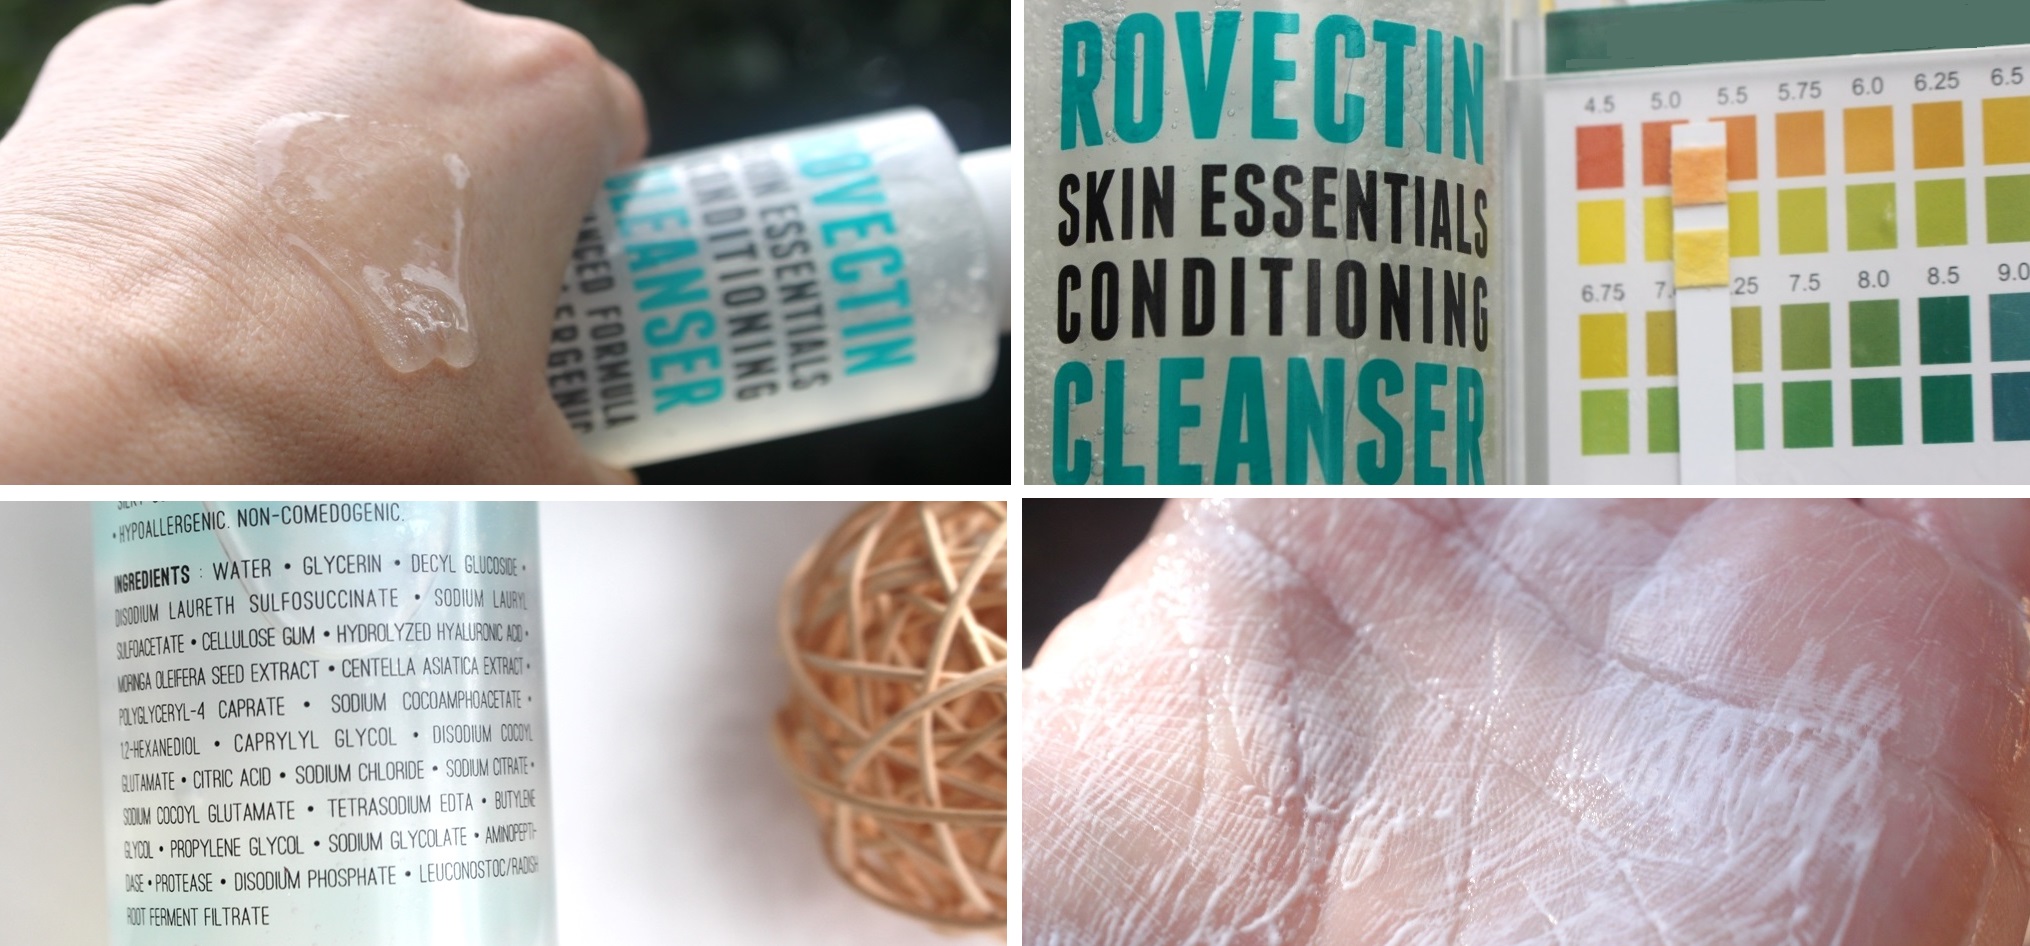 Style Korean Rovectin Set - Conditioning Cleanser texture, pH reading, ingredients and microfoam